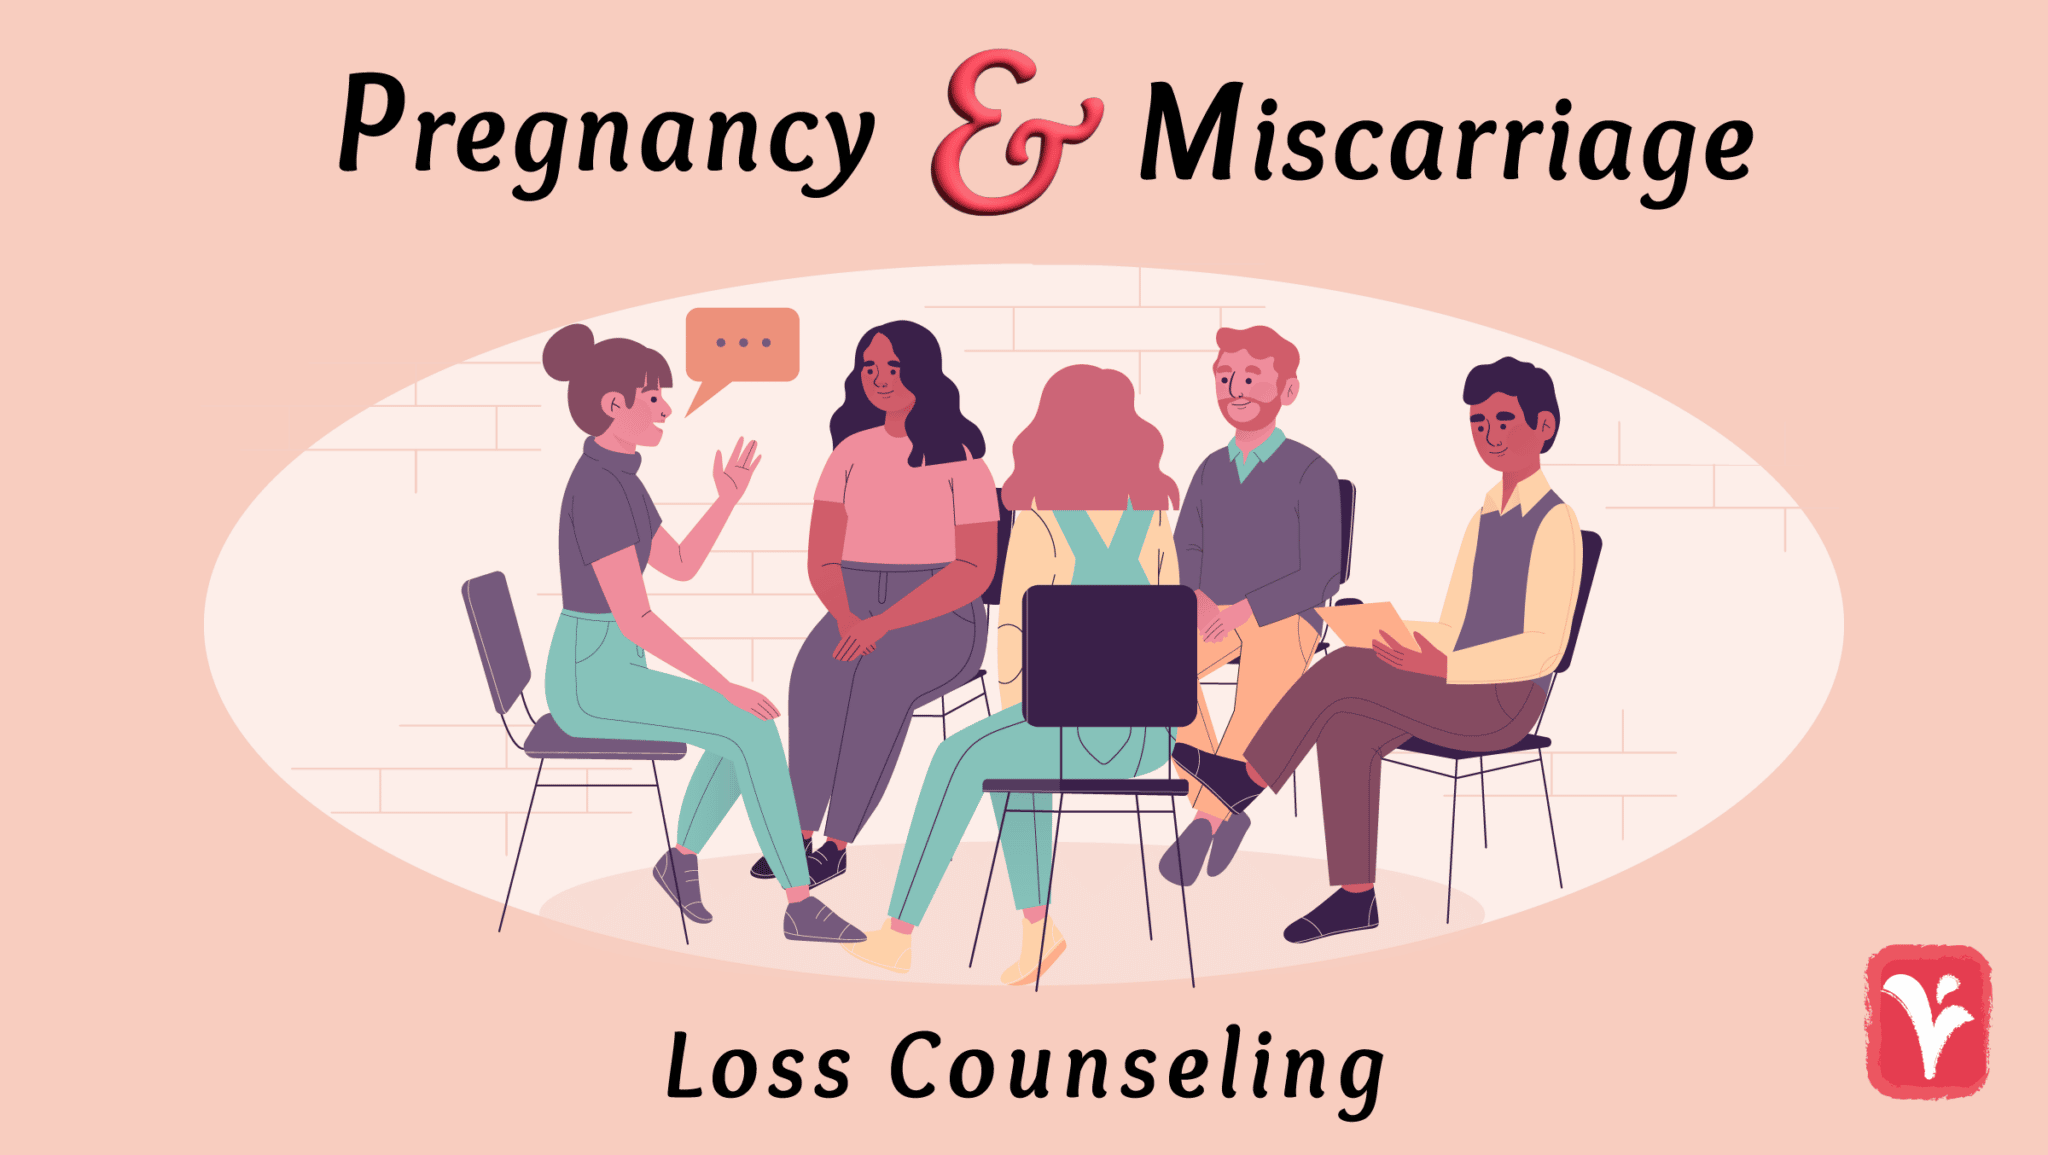 Pregnancy and Miscarriage Loss Counseling